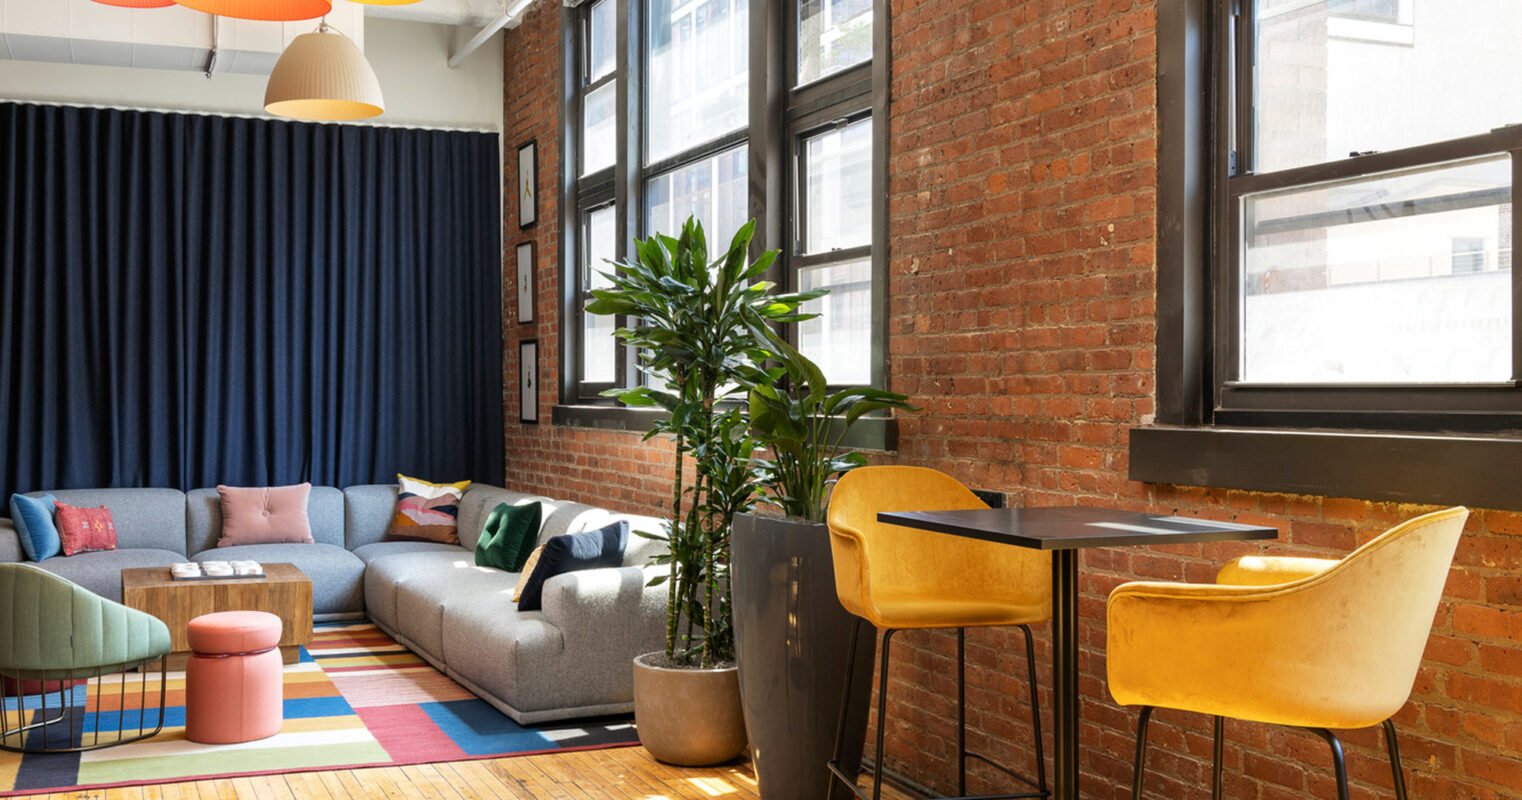 Modern loft living space with exposed brick walls and large windows. Varied colored pendant lighting hangs above a multi-textured seating area. A striped rug anchors the room, flanked by a tall green plant, leading to a cozy nook with bar-height chairs and a wooden table.